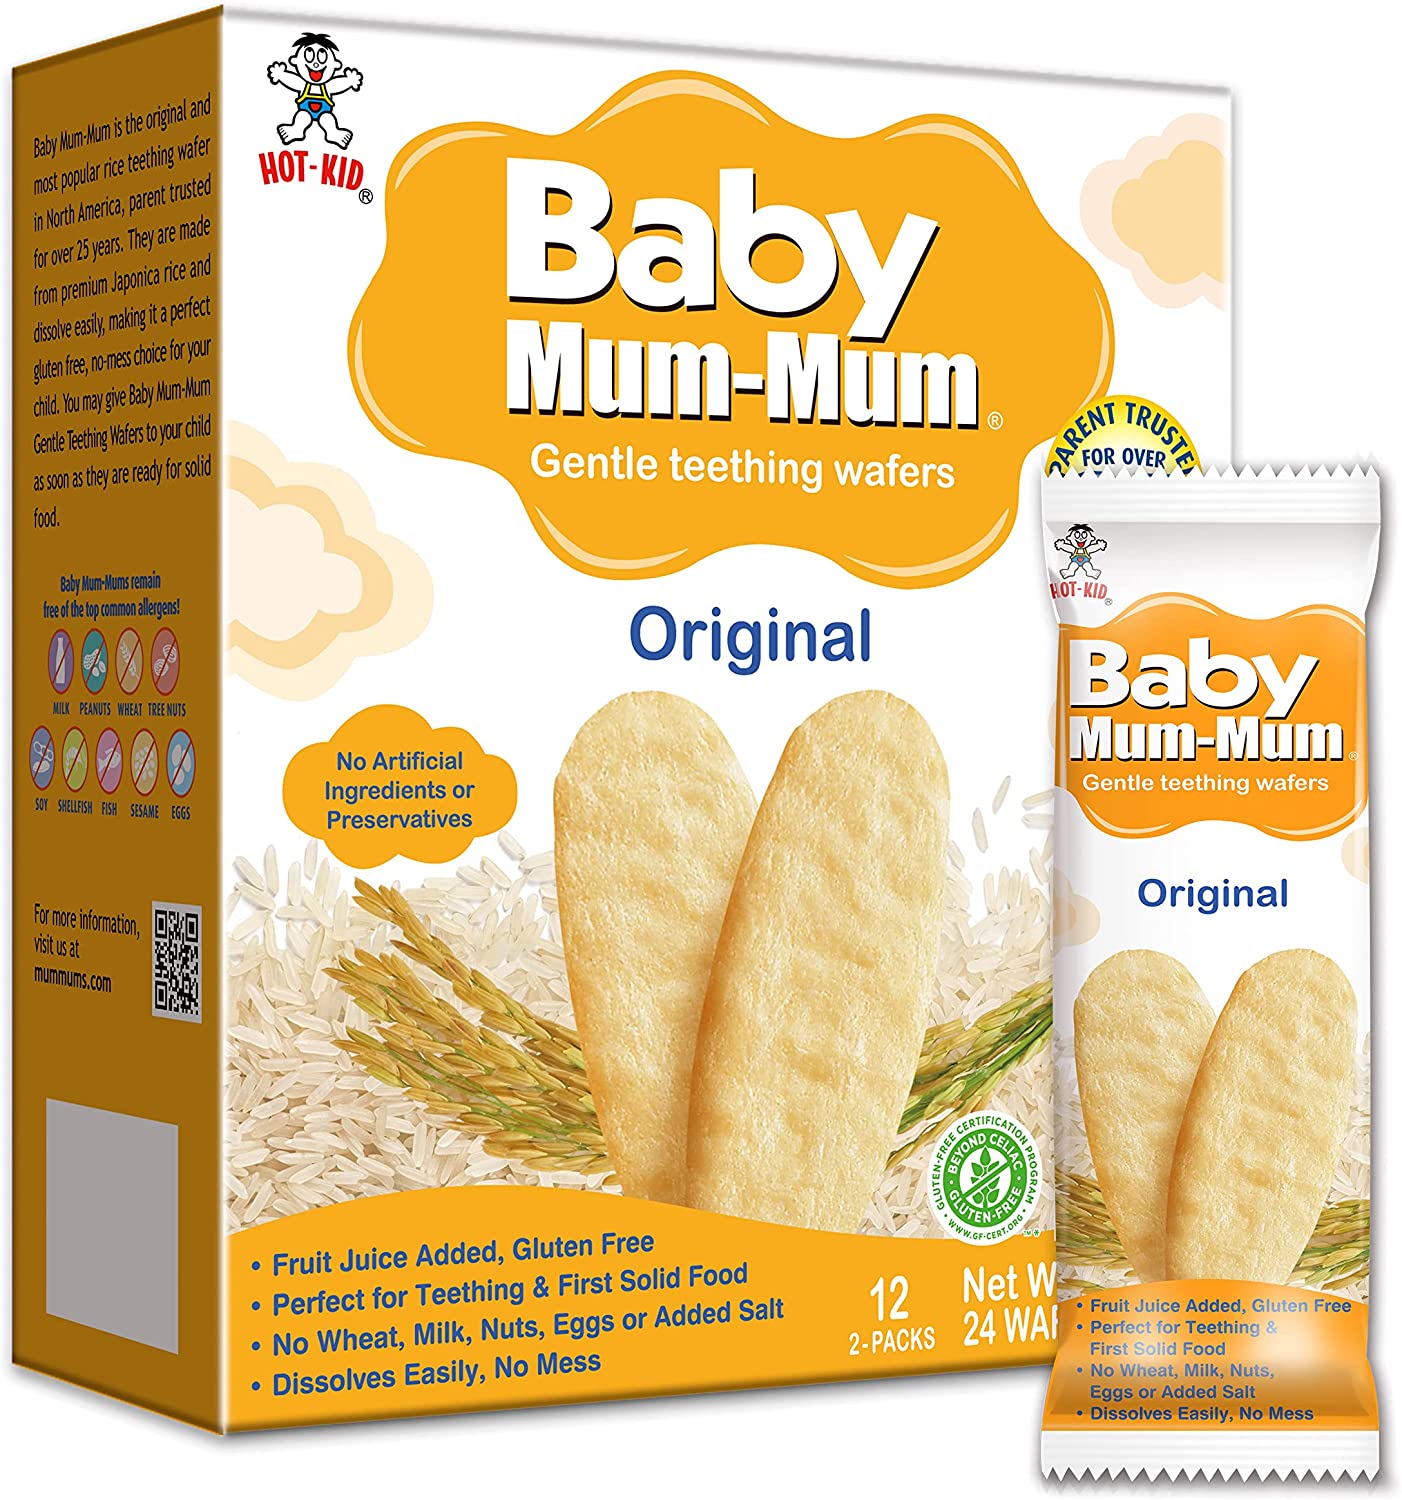 Baby Mum-Mum Rice Rusks, Original, 24 Pieces (Pack of 6) Gluten Free, Allergen Free, Non-GMO, Rice Teether Cookie for Teething Infants